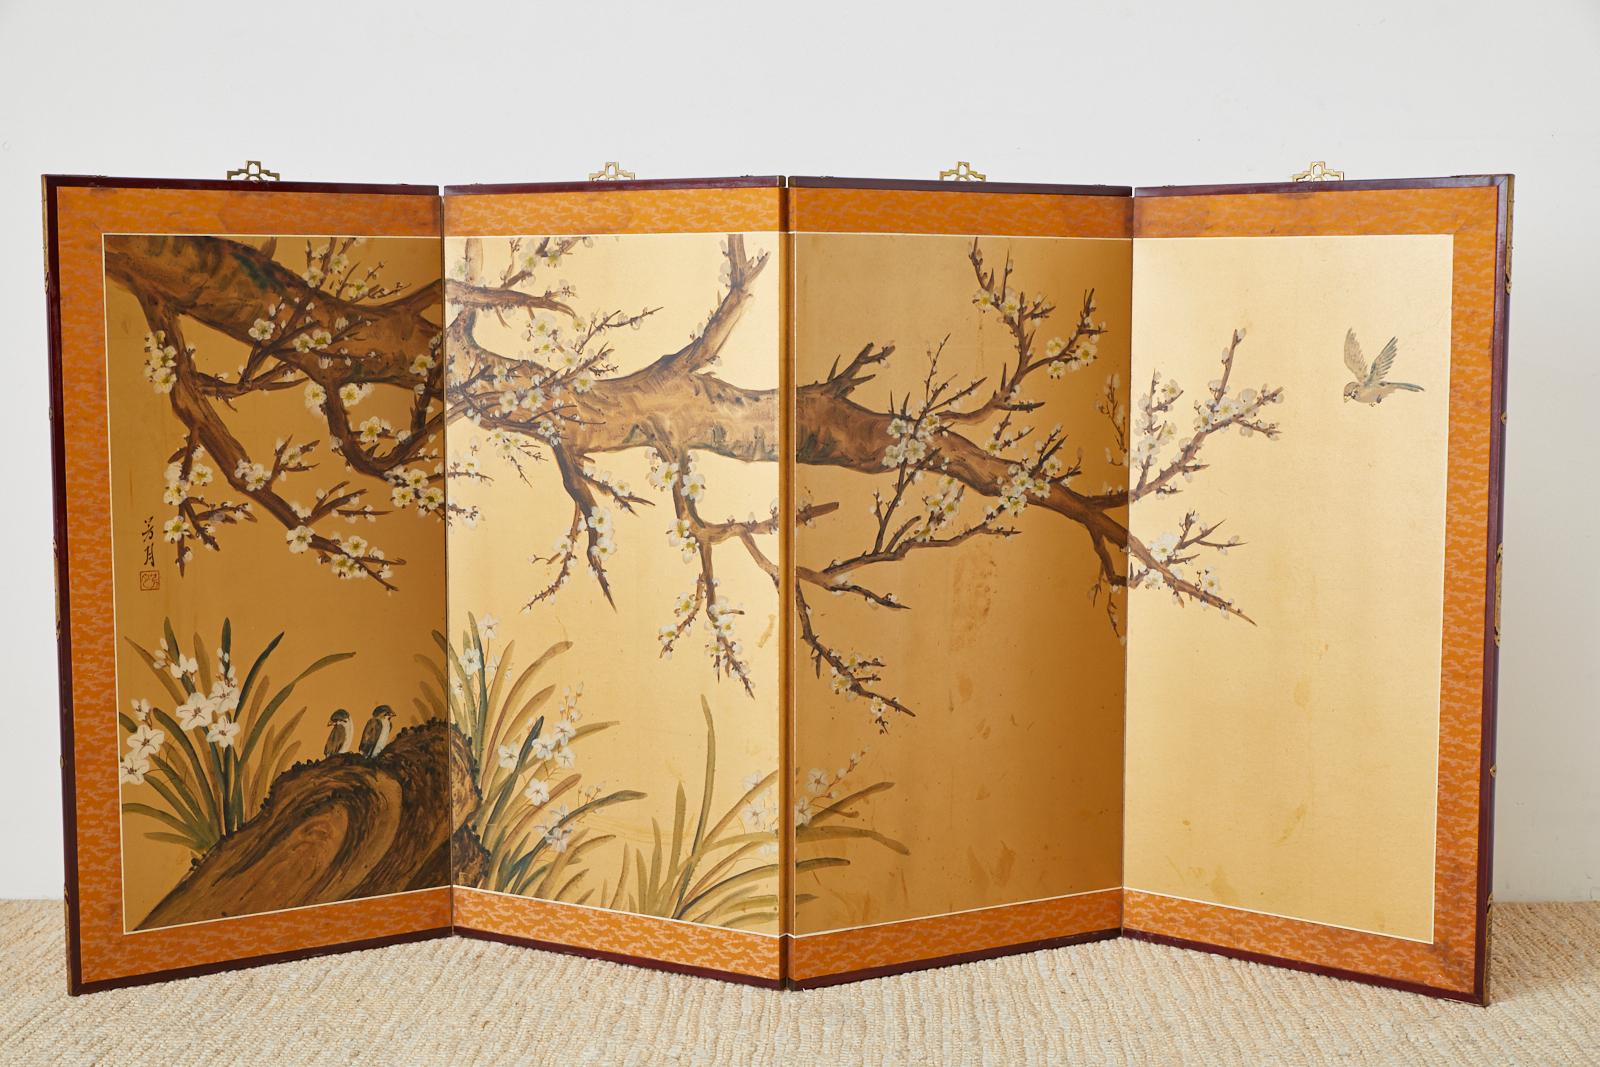 Japanese Showa period four-panel screen depicting a large flowering plum tree, or prunus tree with sparrows. Painted over a gold leaf square background in the Nihonga school style. Ink and color pigments signed with a seal by artist Hogetsu. Set in